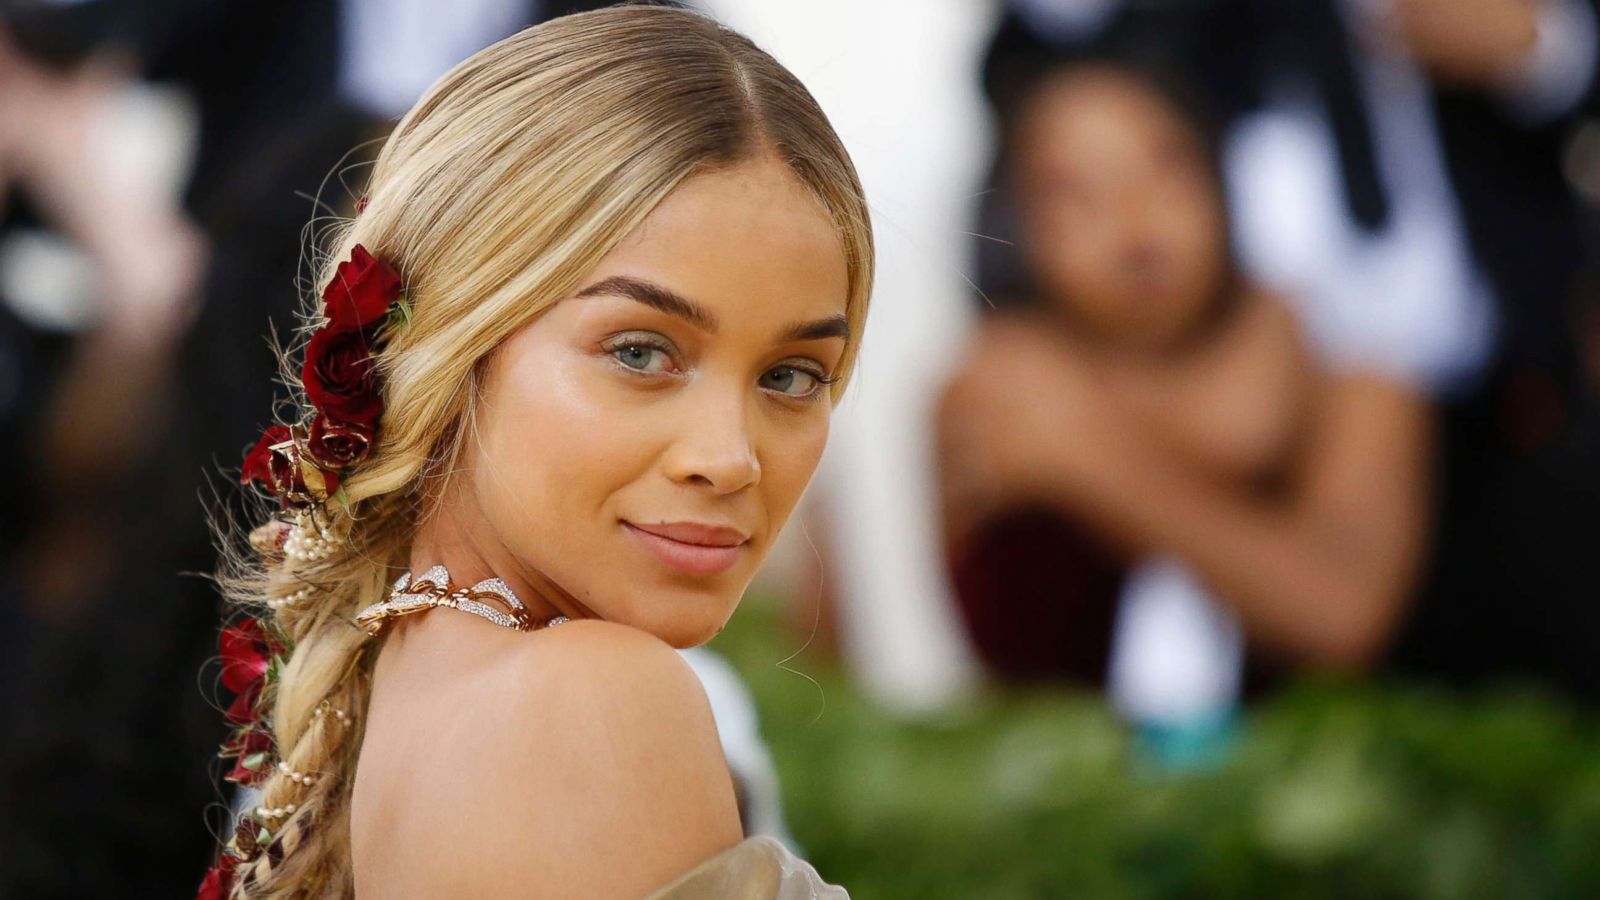 The Story Behind the Famous Photos of Jasmine Sanders and the